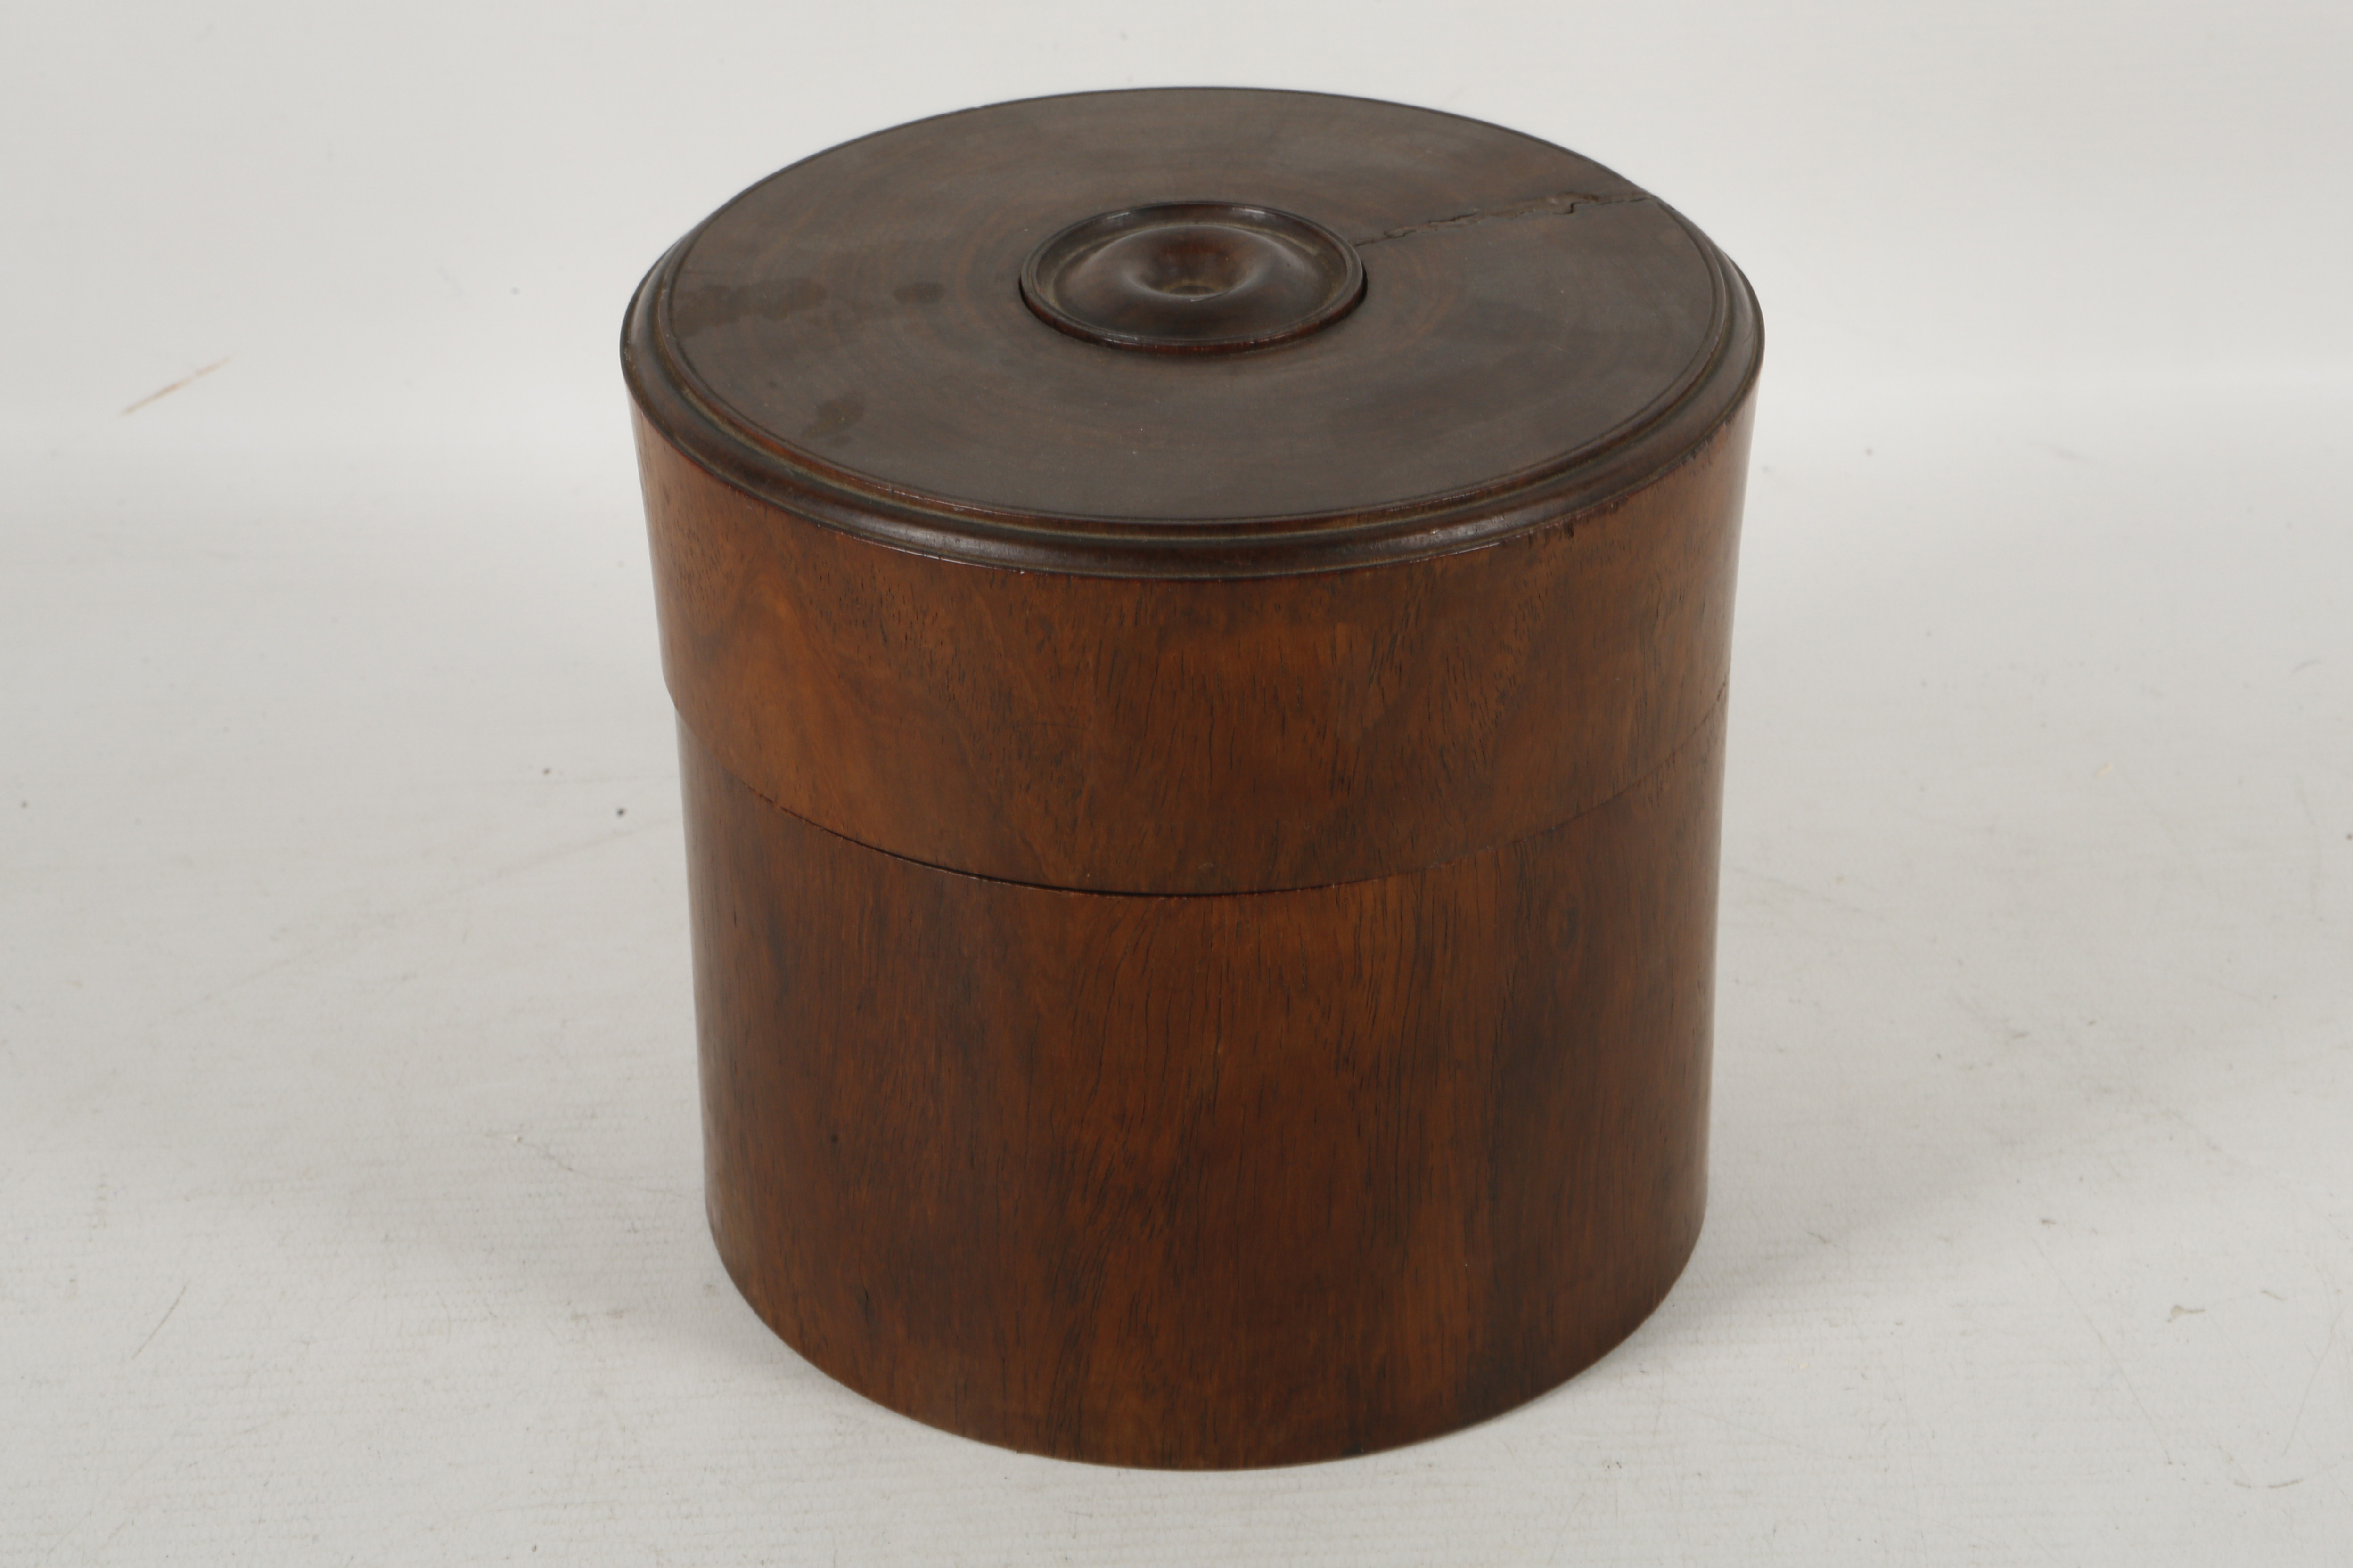 A cylindrical section bitong-form hardwood box and cover, the cover with turned decorative